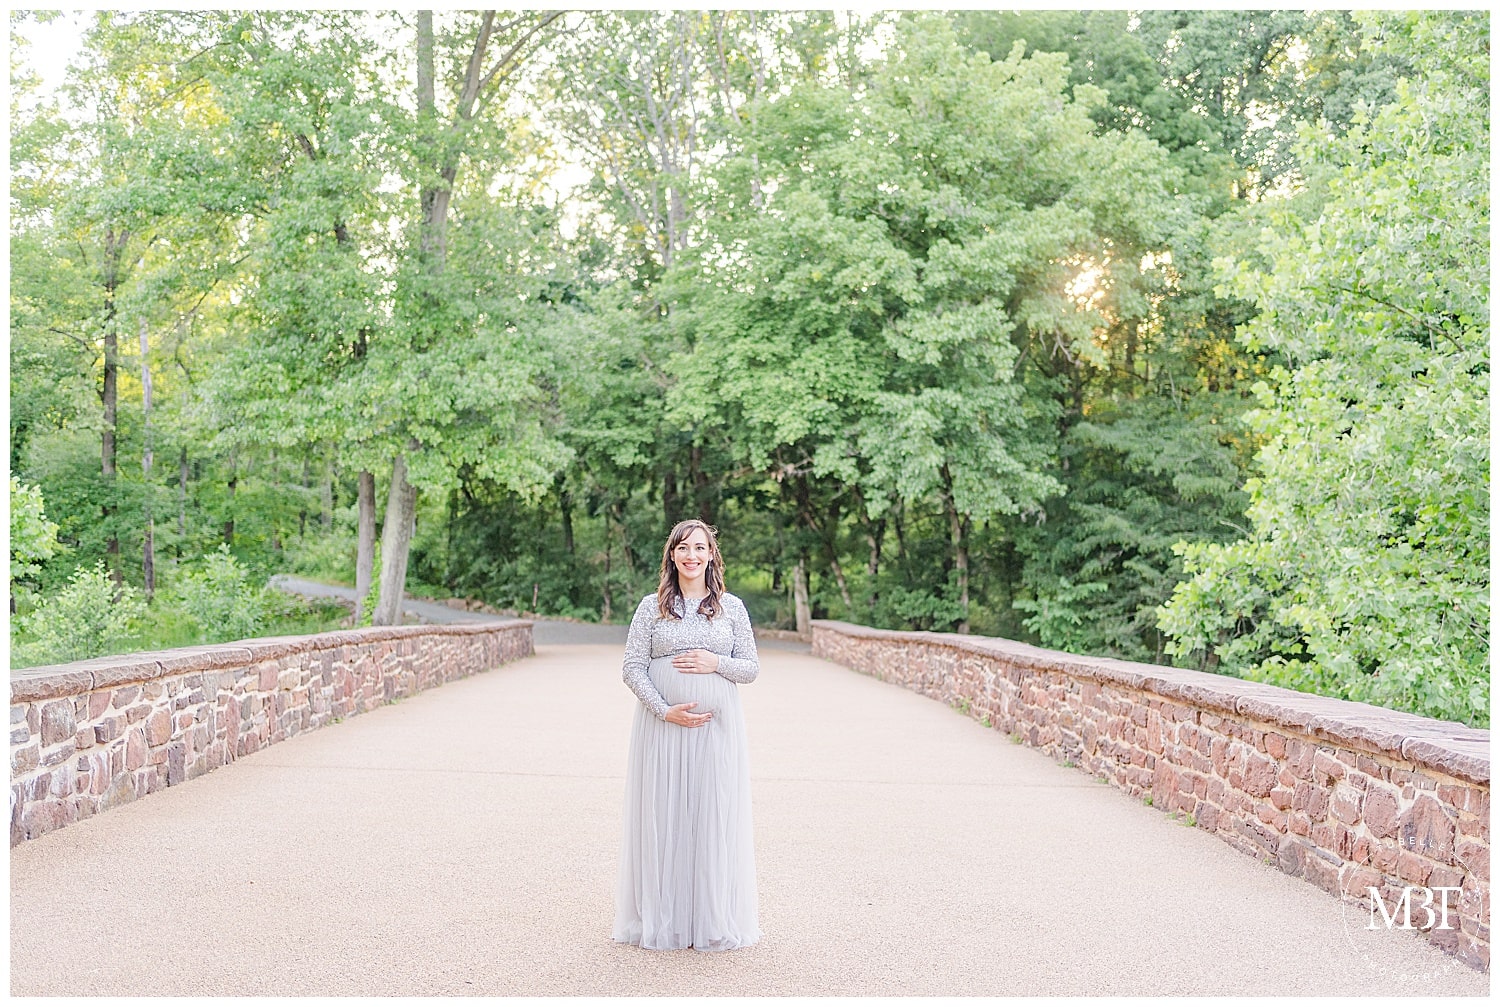 expecting mom excited for her baby during her Manassas, Virginia maternity photo shoot, taken by TuBelle Photography, a Prince William County maternity photographer